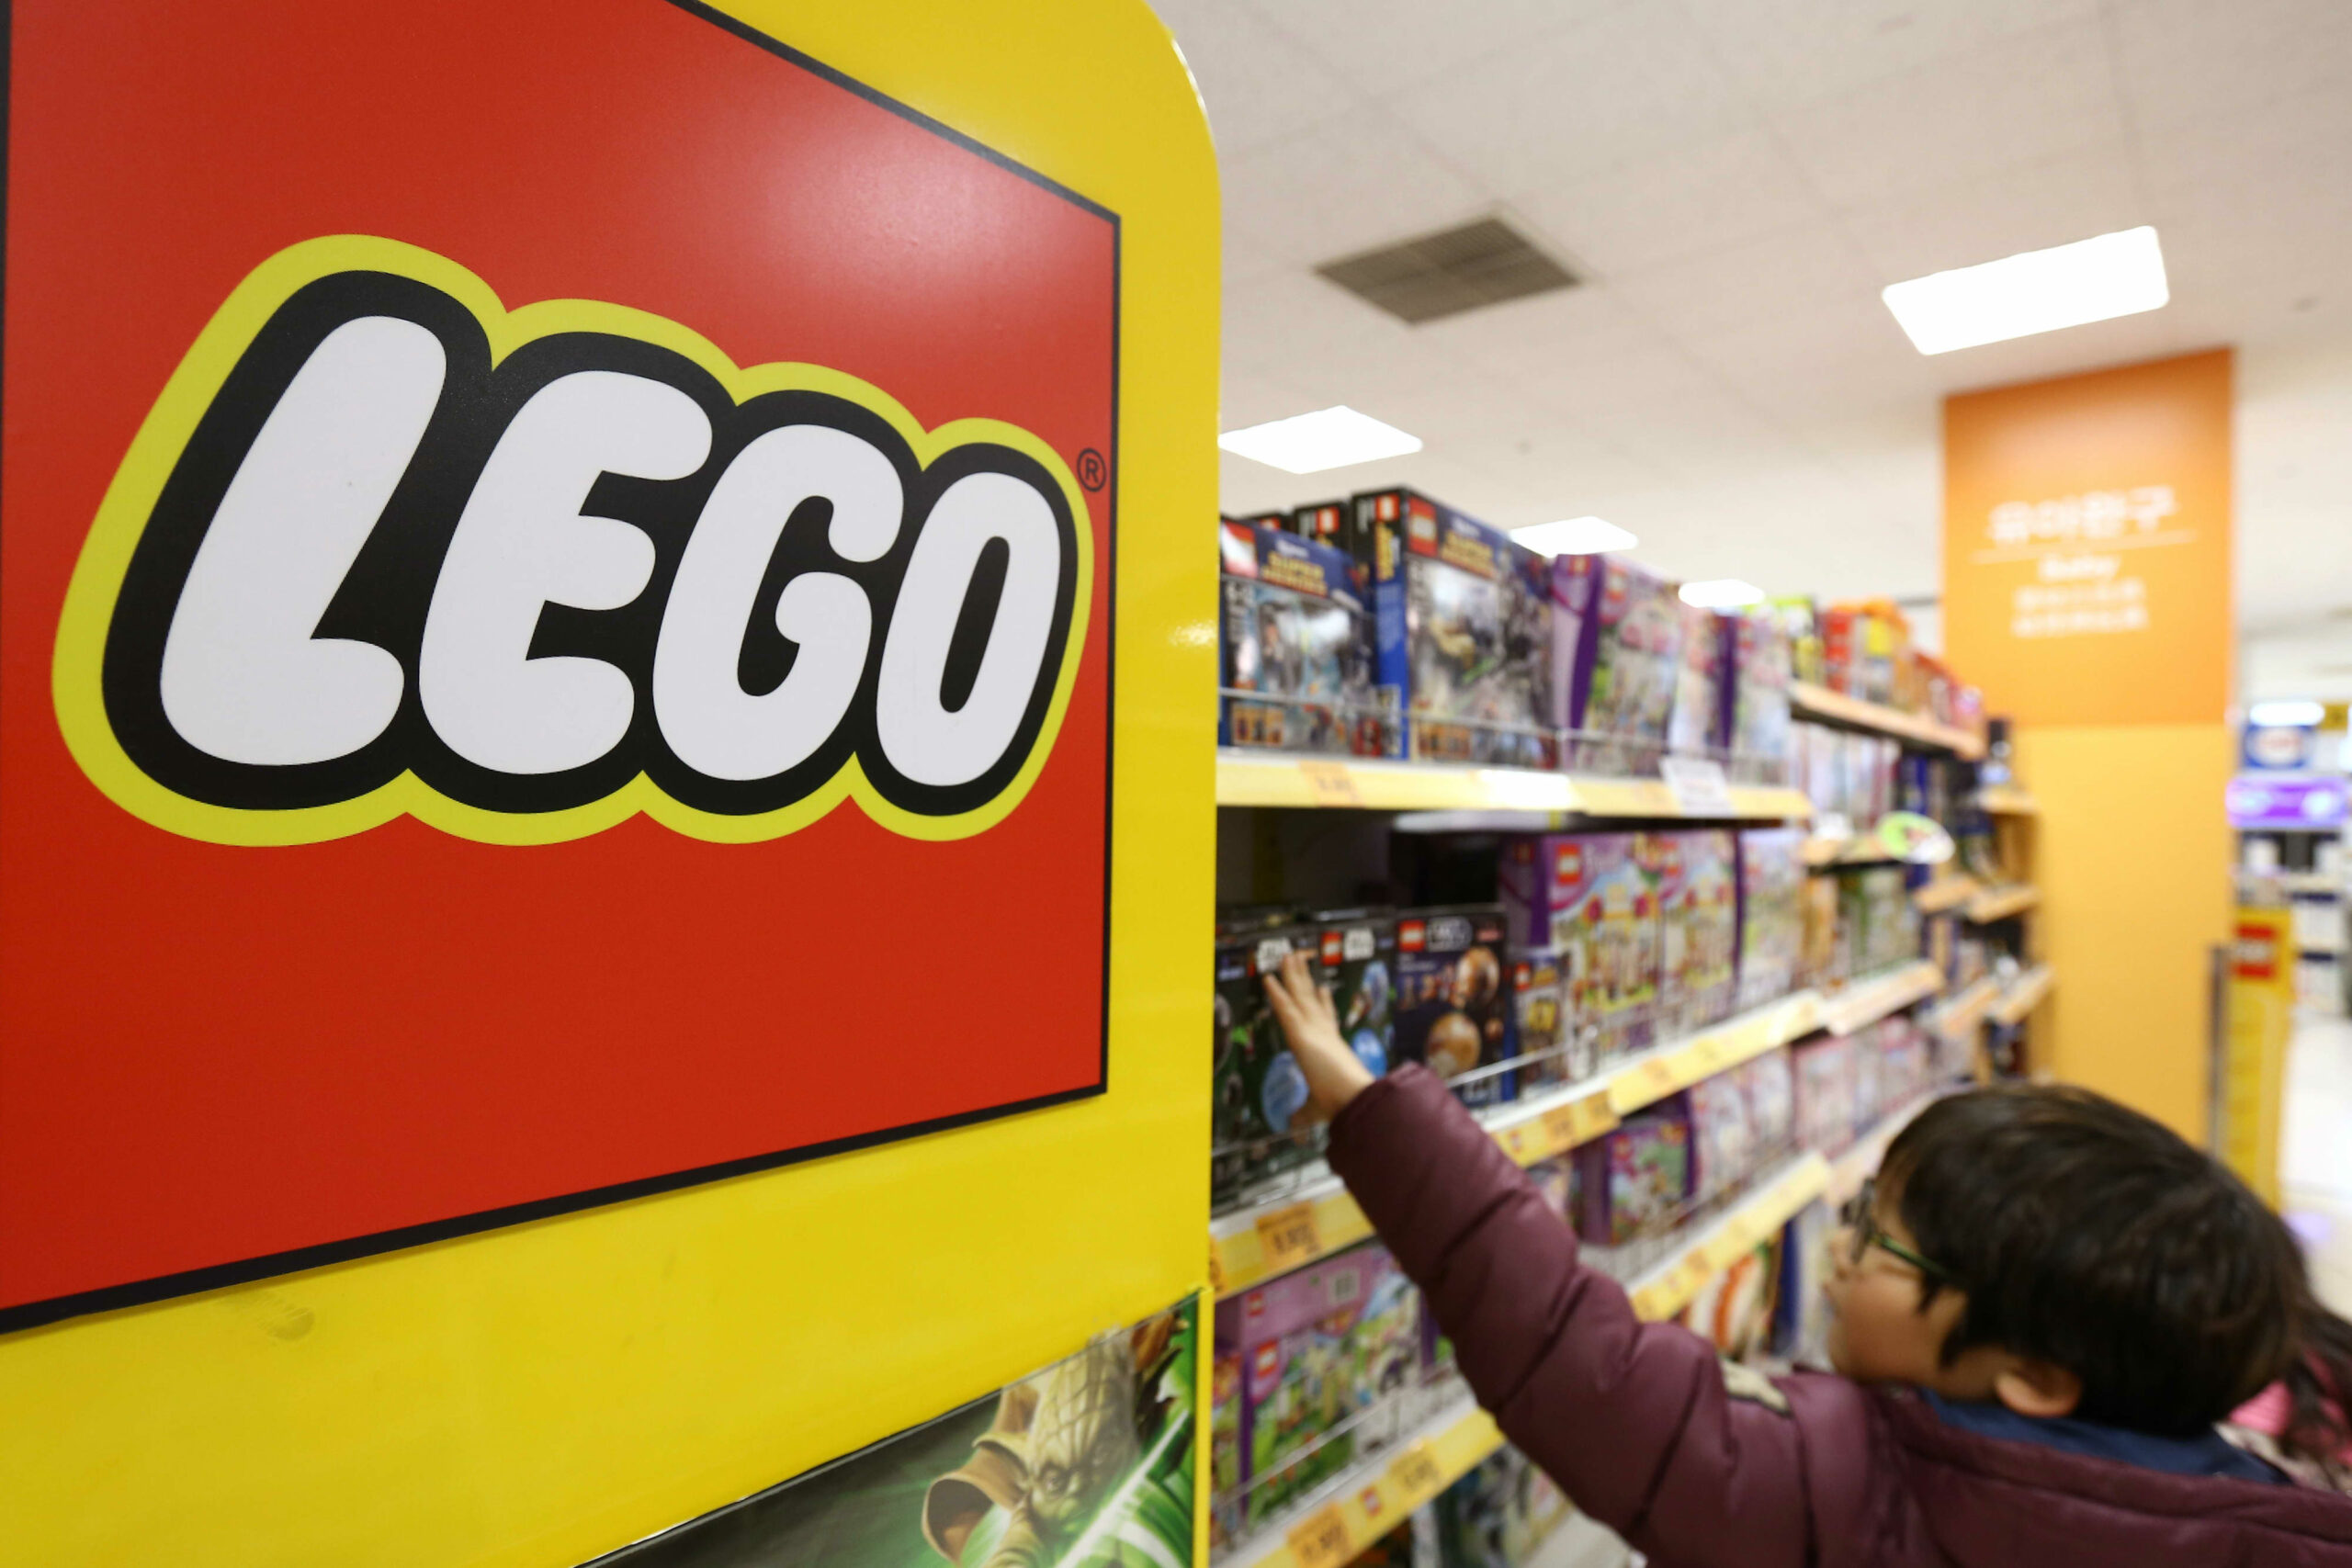 Lego gross sales soared in 2020, helped by e-commerce and China development